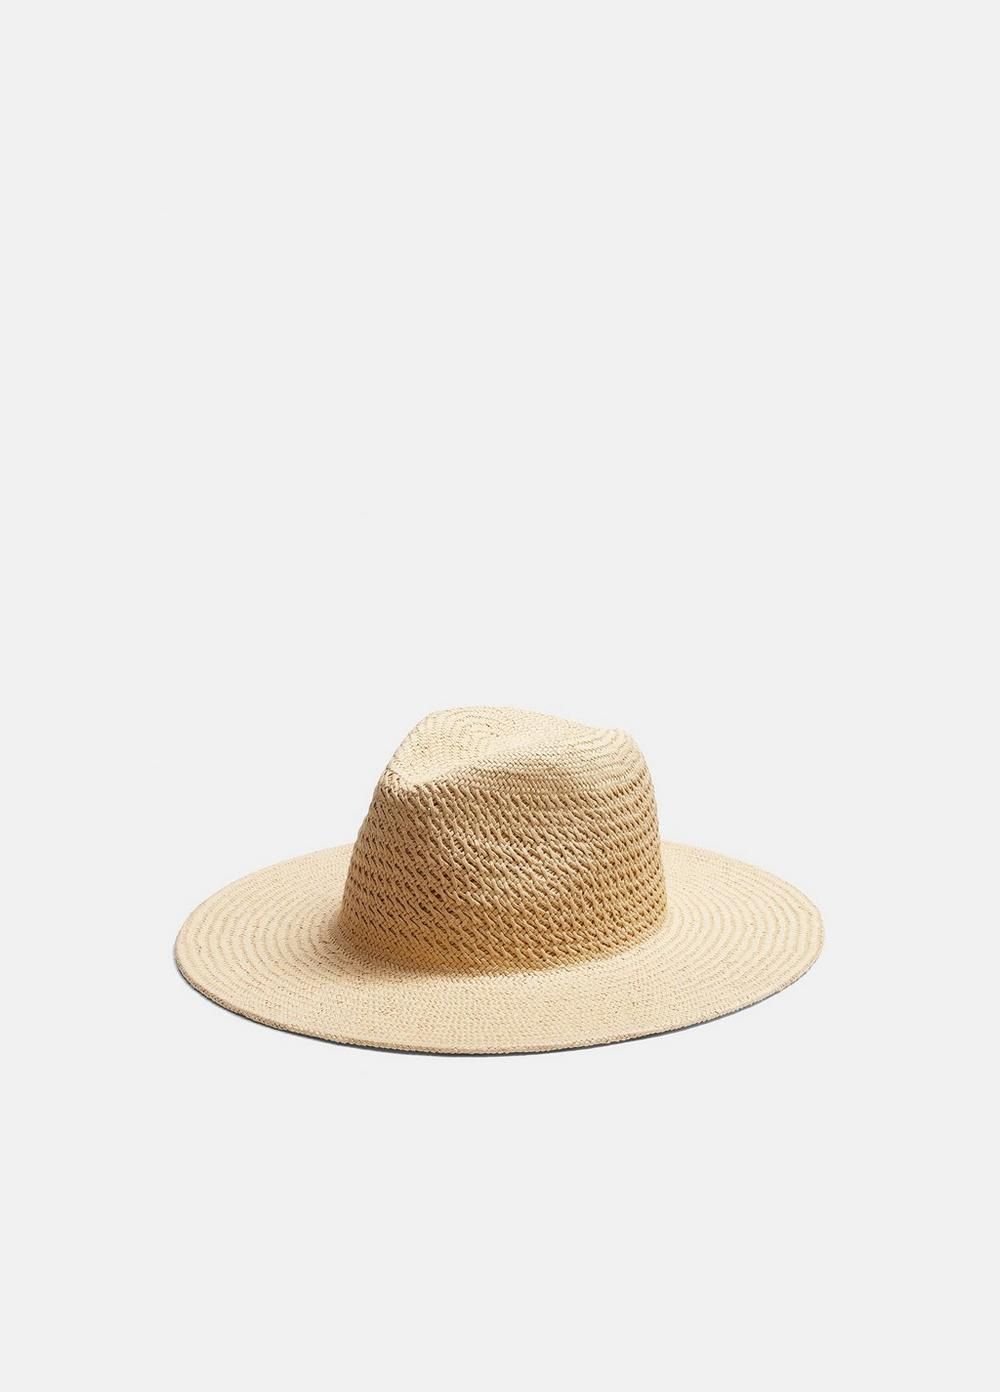 Packable Vented Straw Hat | Vince LLC